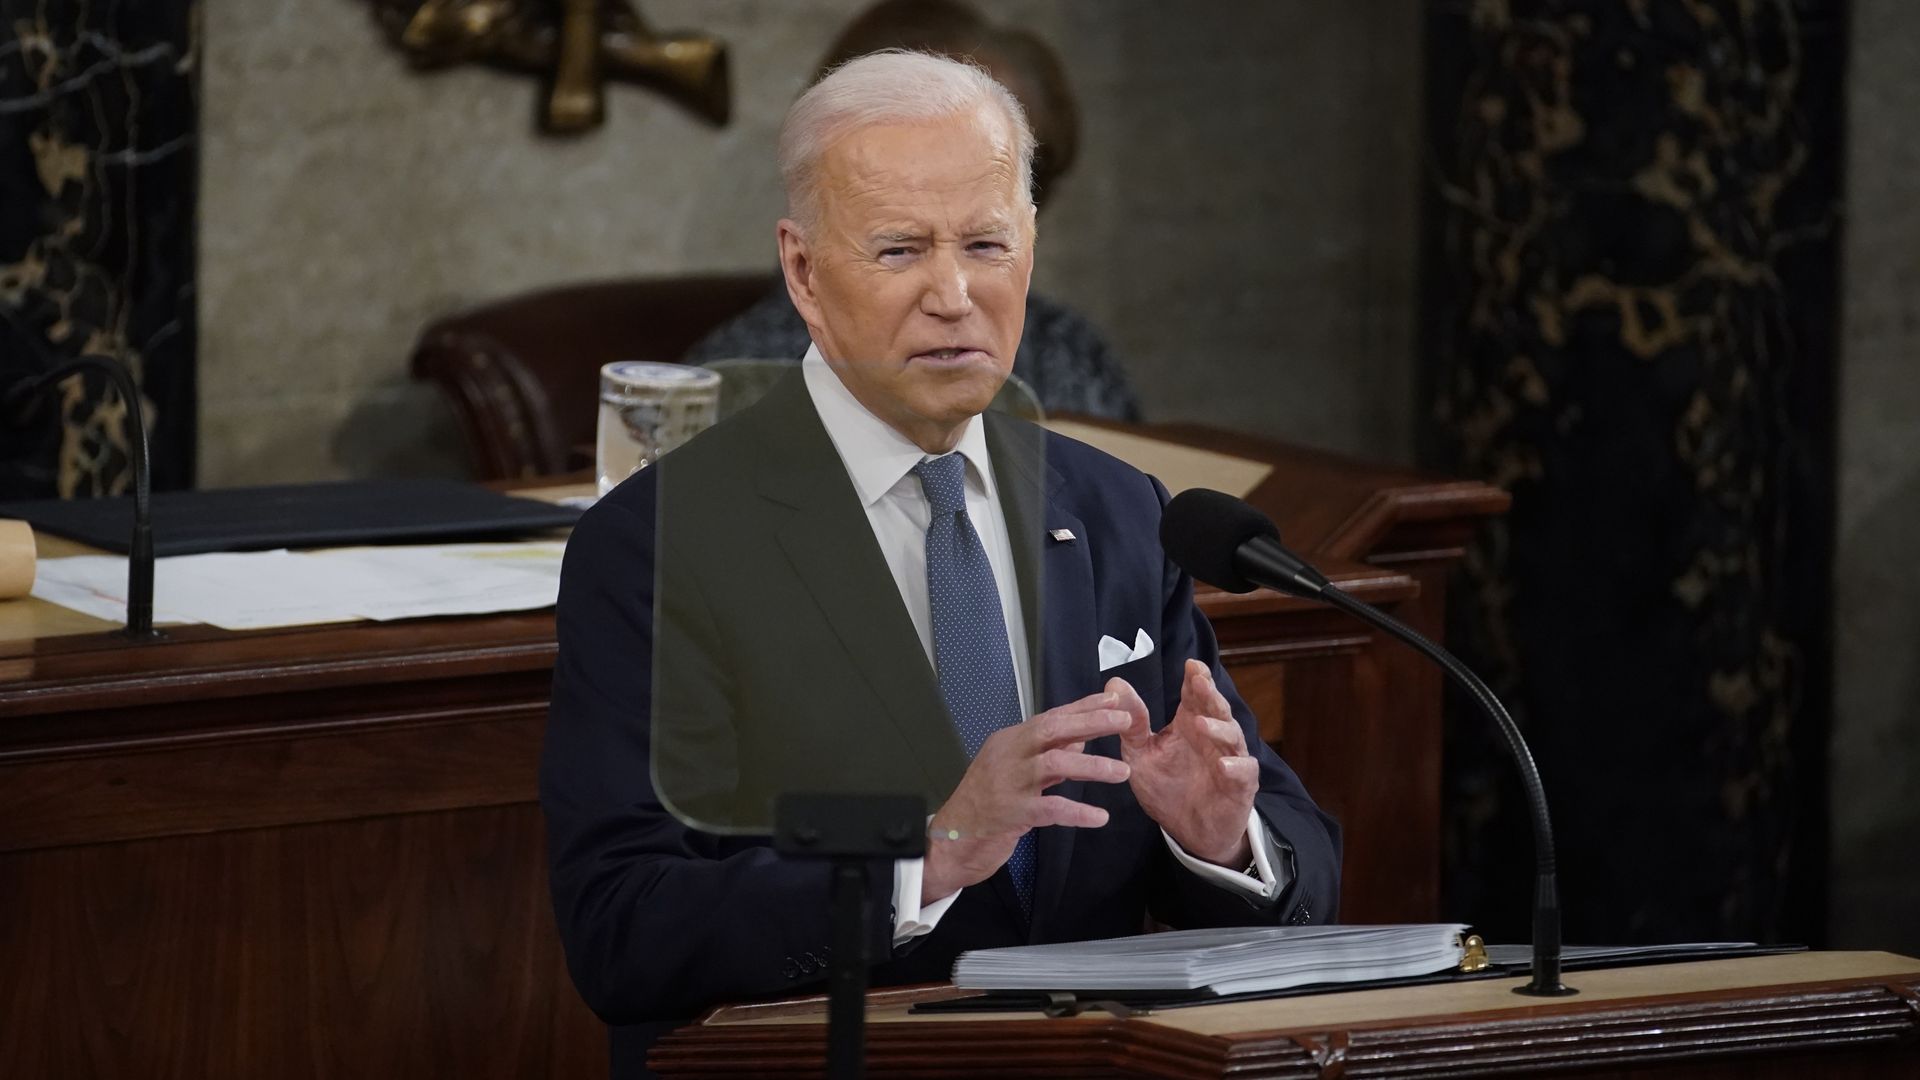 President Biden, wearing a dark blue suit, white shirt and blue tie, speaks at the House of Representatives rostrum in front of a teleprompter.